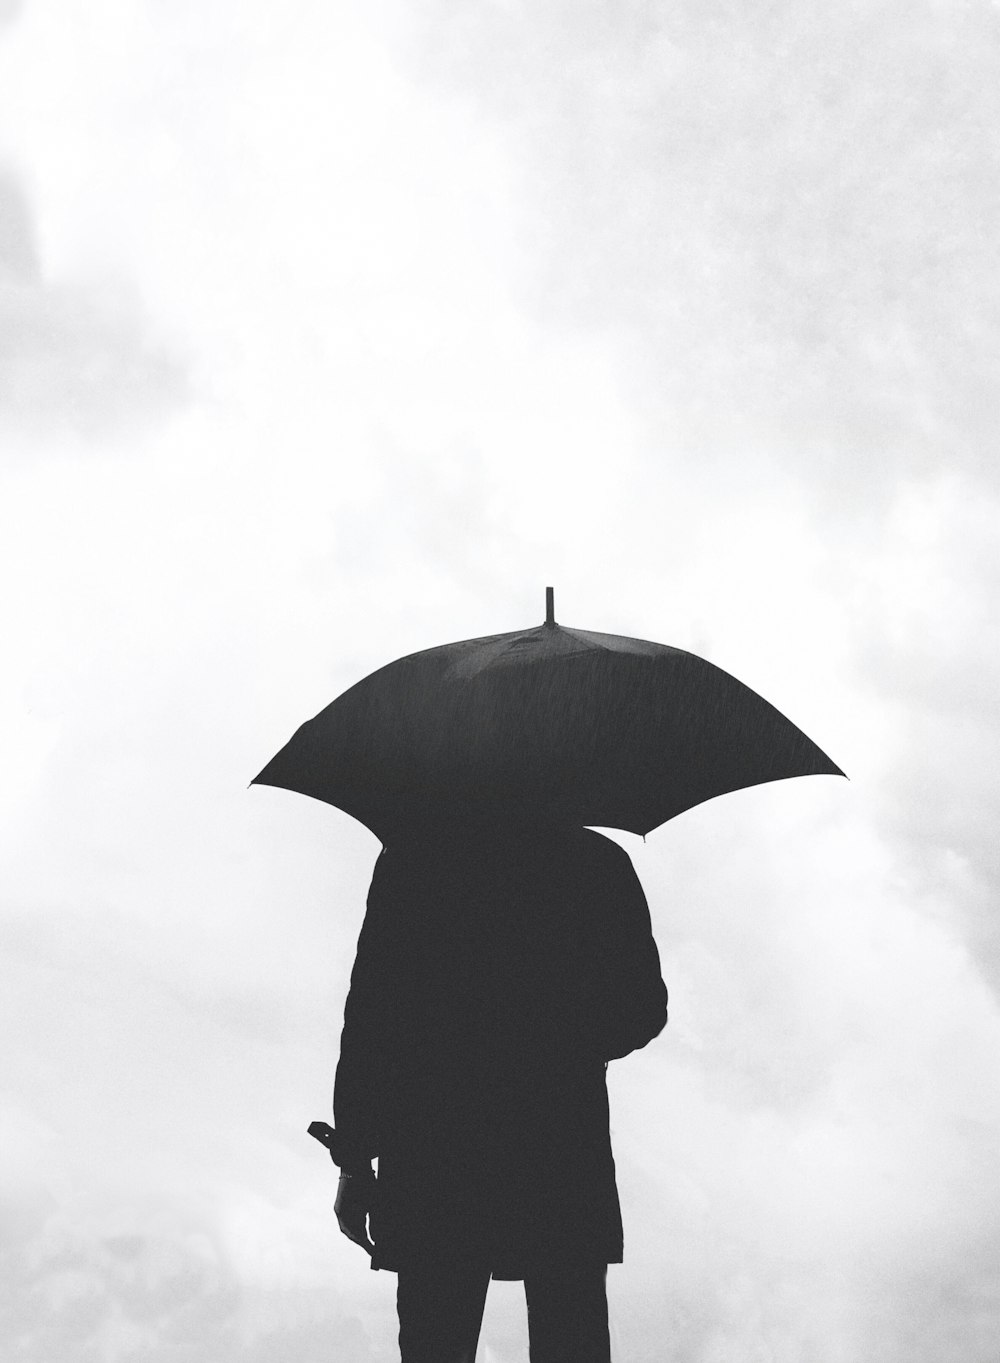 silhouette of person under umbrella under cloudy sky